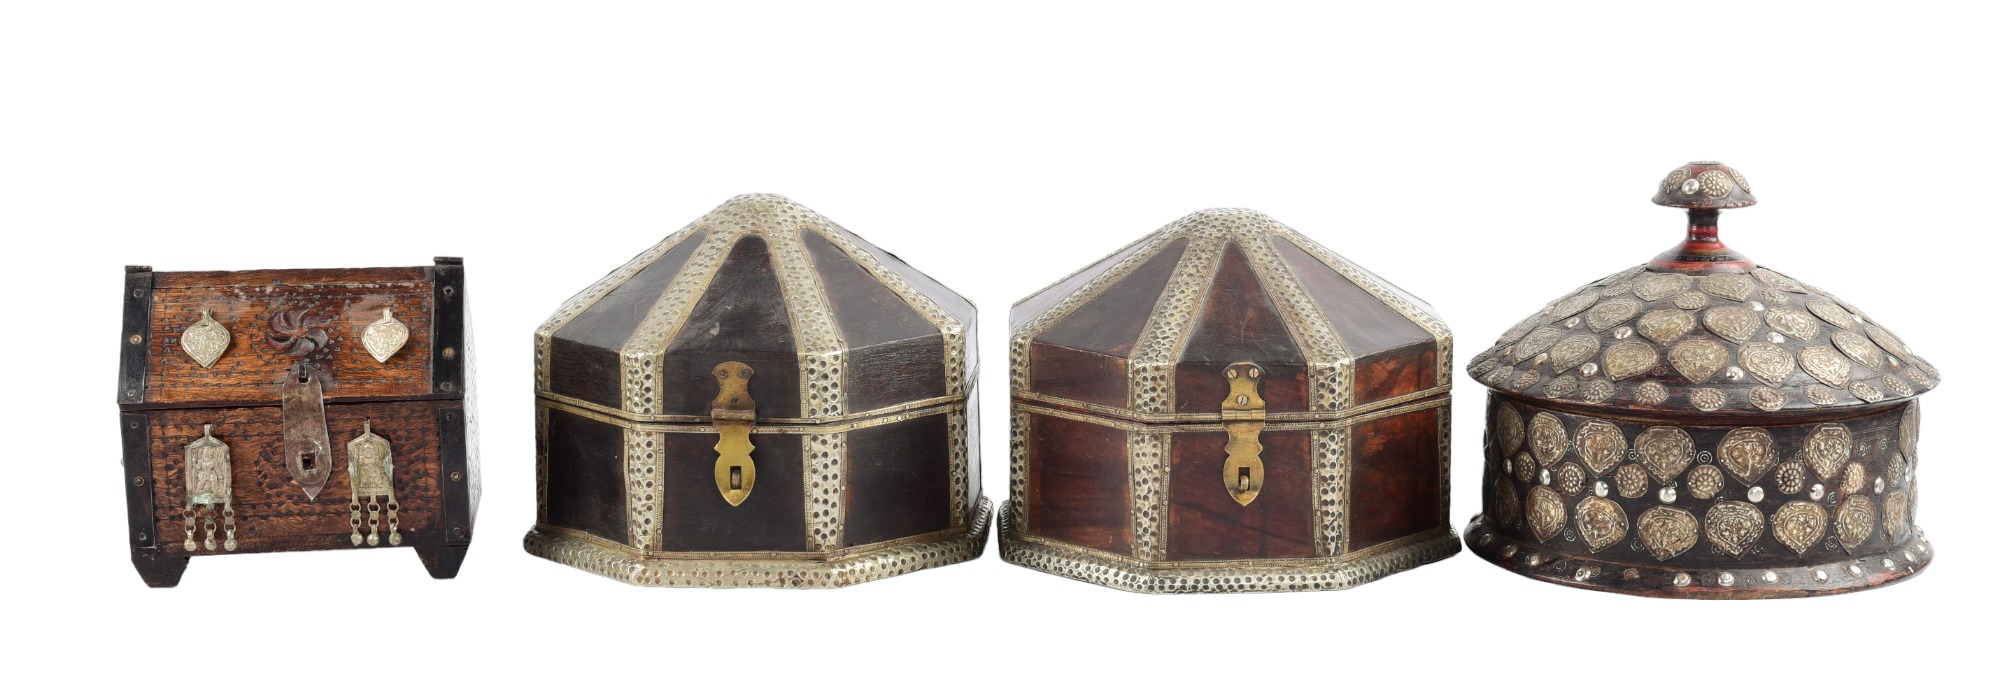  4 Asian covered boxes to include 3ca6b8